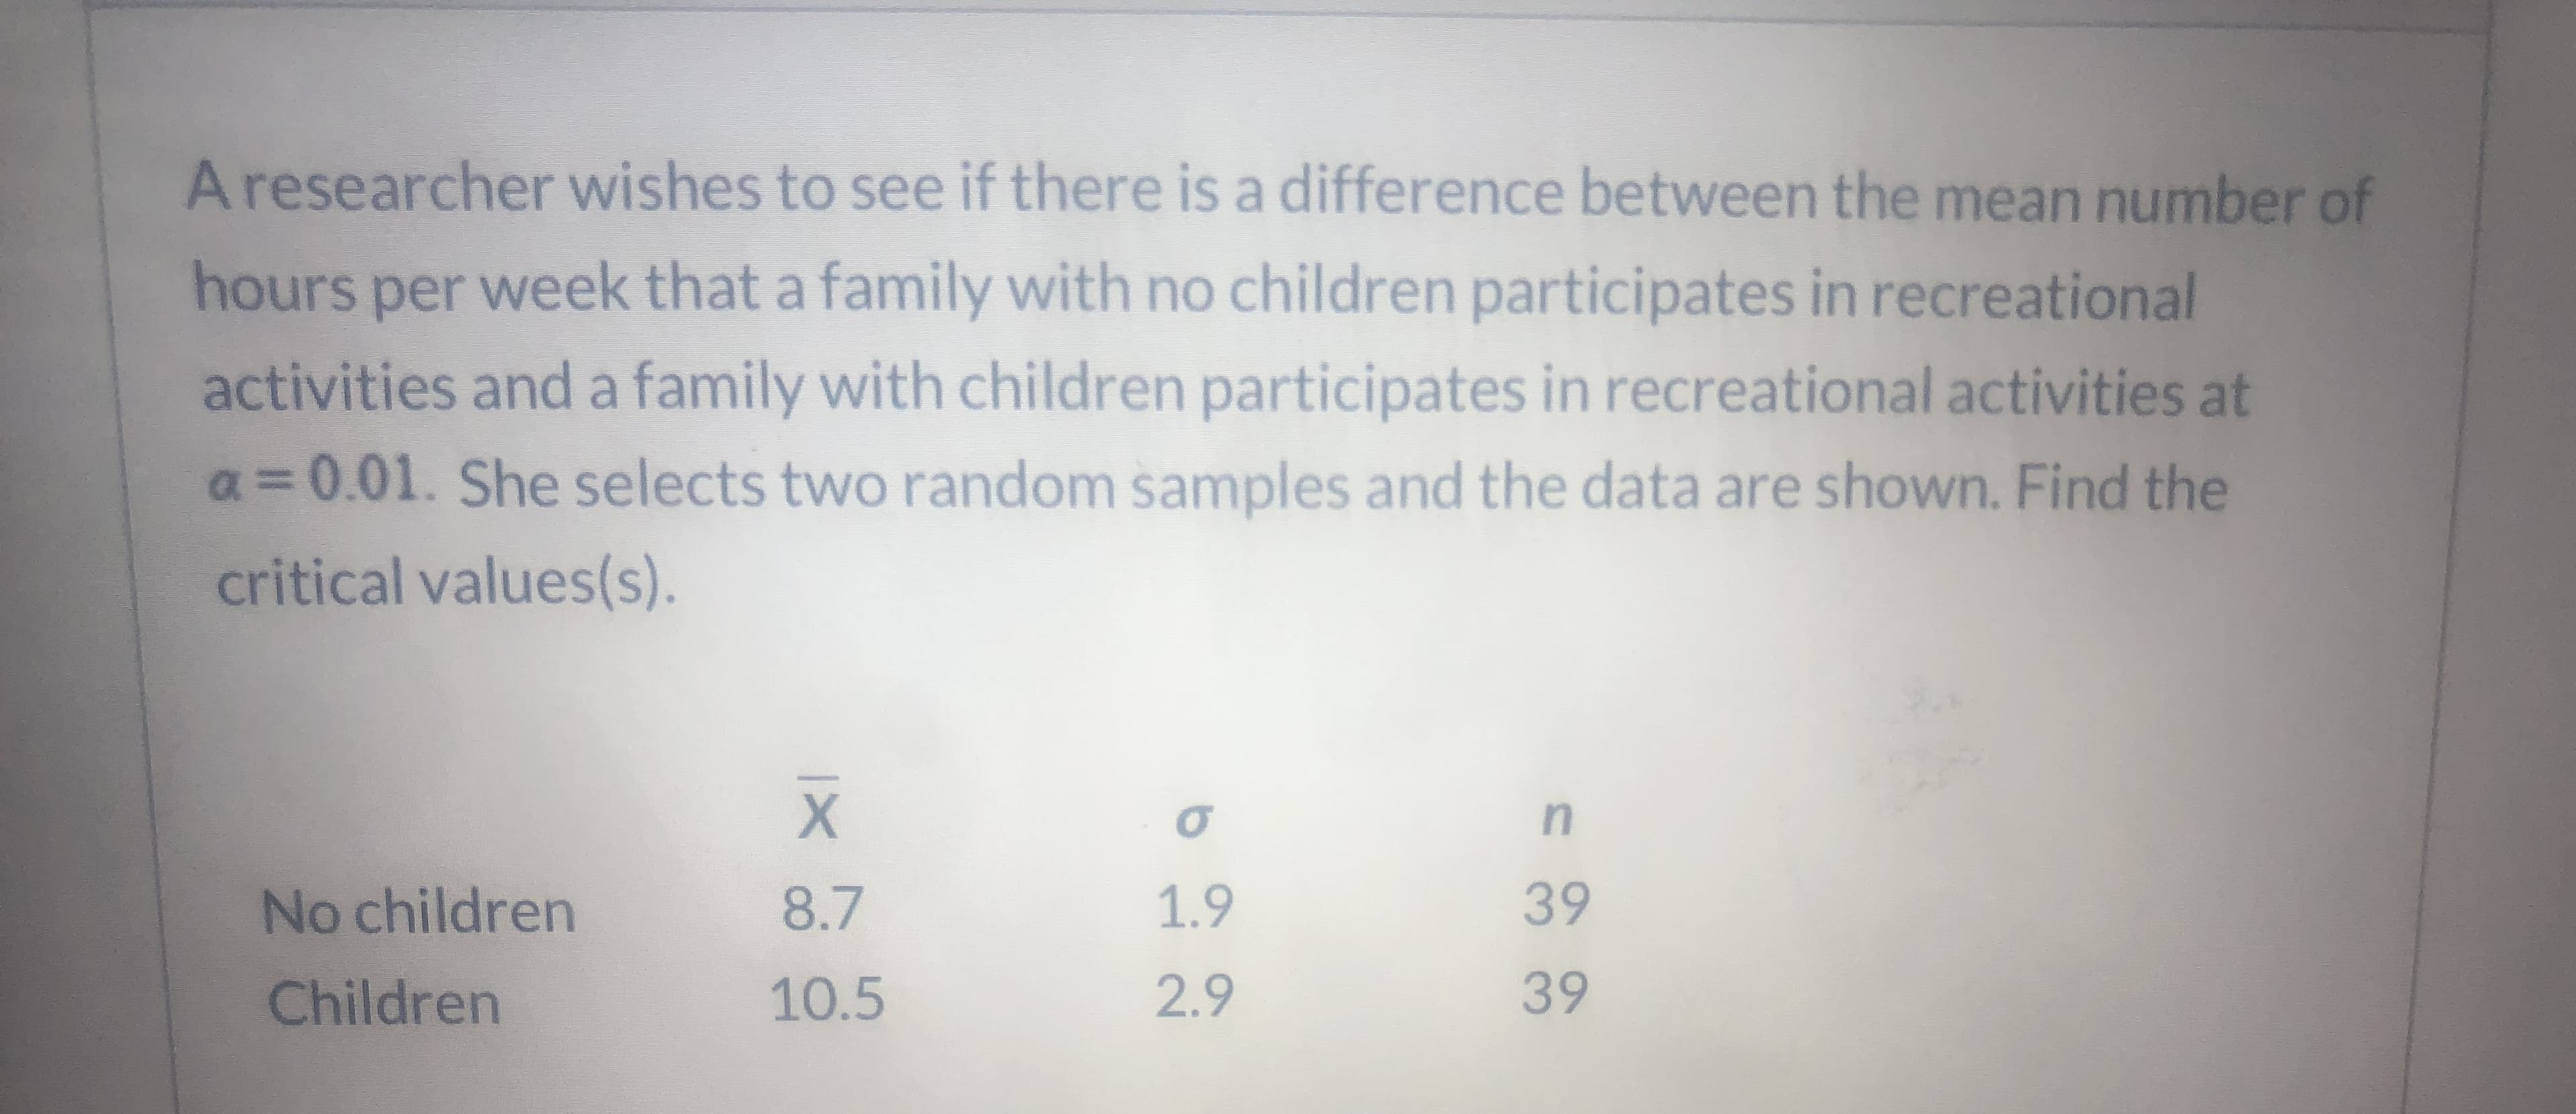 Aresearcher wishes to see if there is a difference between the mean number of
hours per week that a family with no children participates in recreational
activities and a family with children participates in recreational activities at
a=0.01. She selects two random samples and the data are shown. Find the
critical values(s).
in
No children
8.7
1.9
39
Children
10.5
2.9
39
